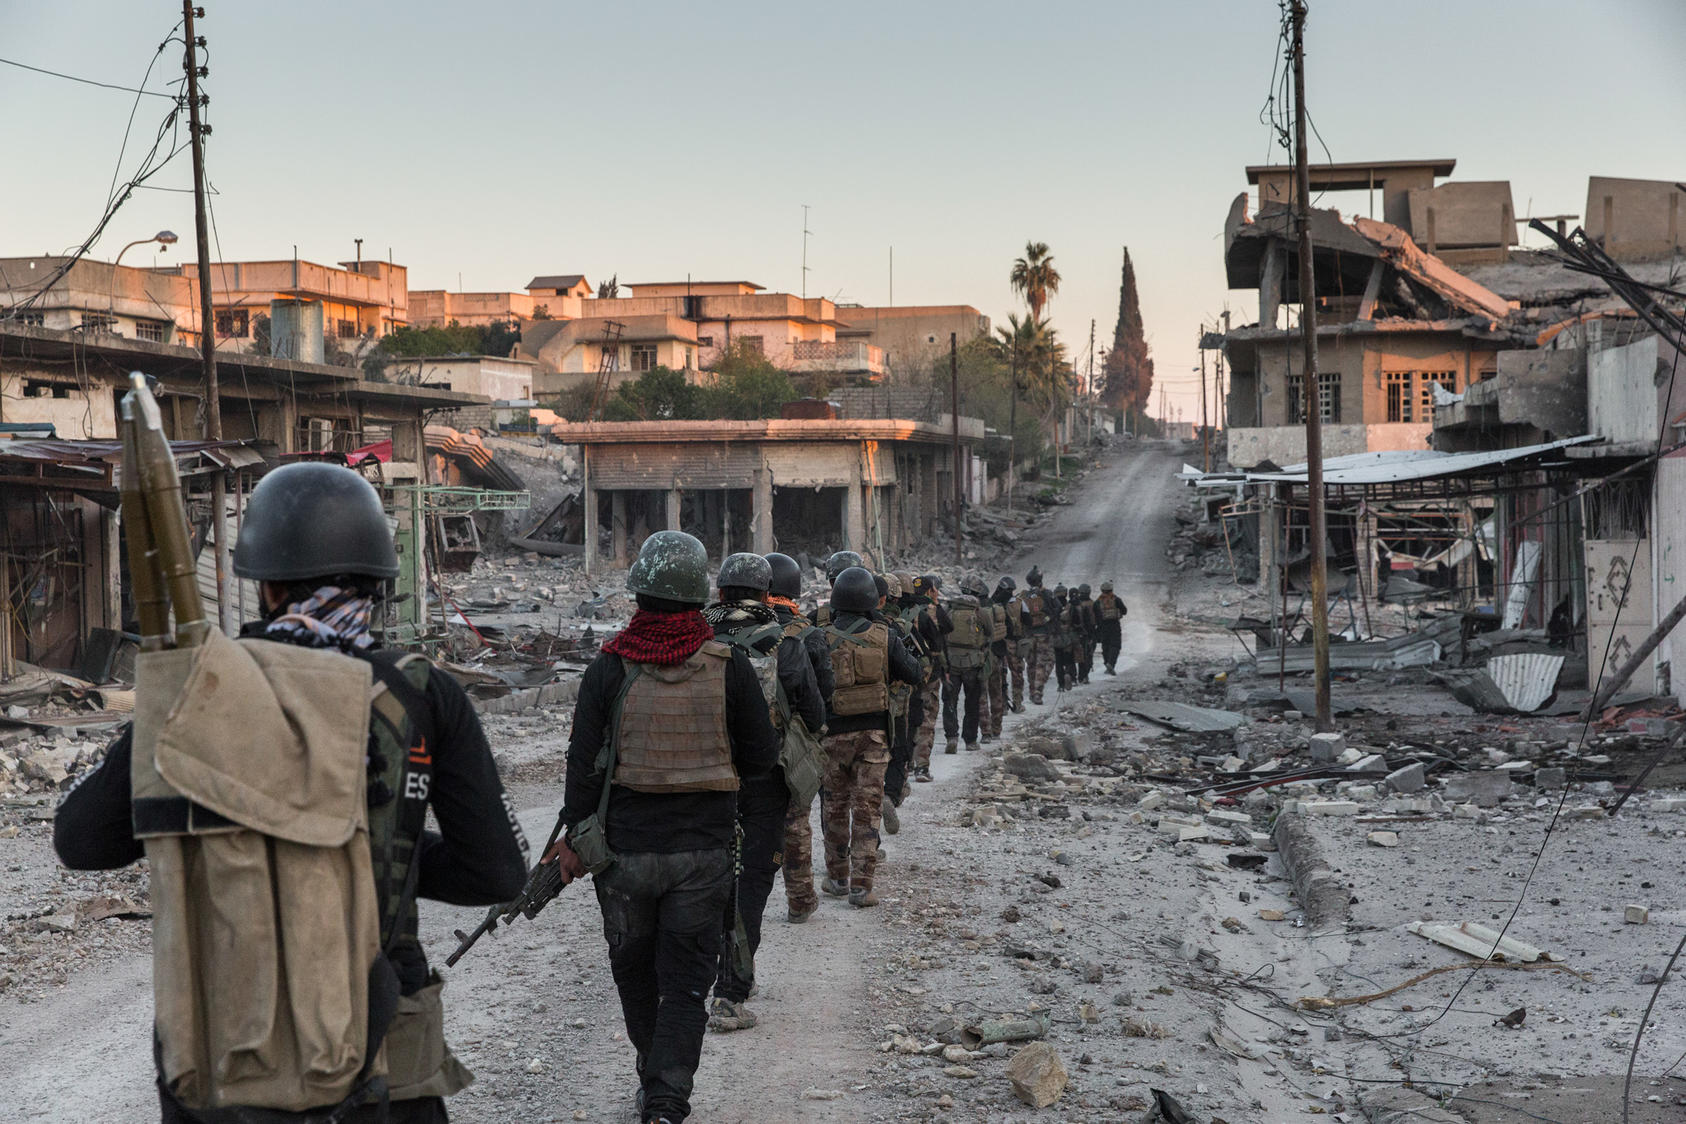 Iraqi special forces soldiers during an operation in western Mosul, Iraq, March 25, 2017. Photo Courtesy of The New York Times/Ivor Prickett